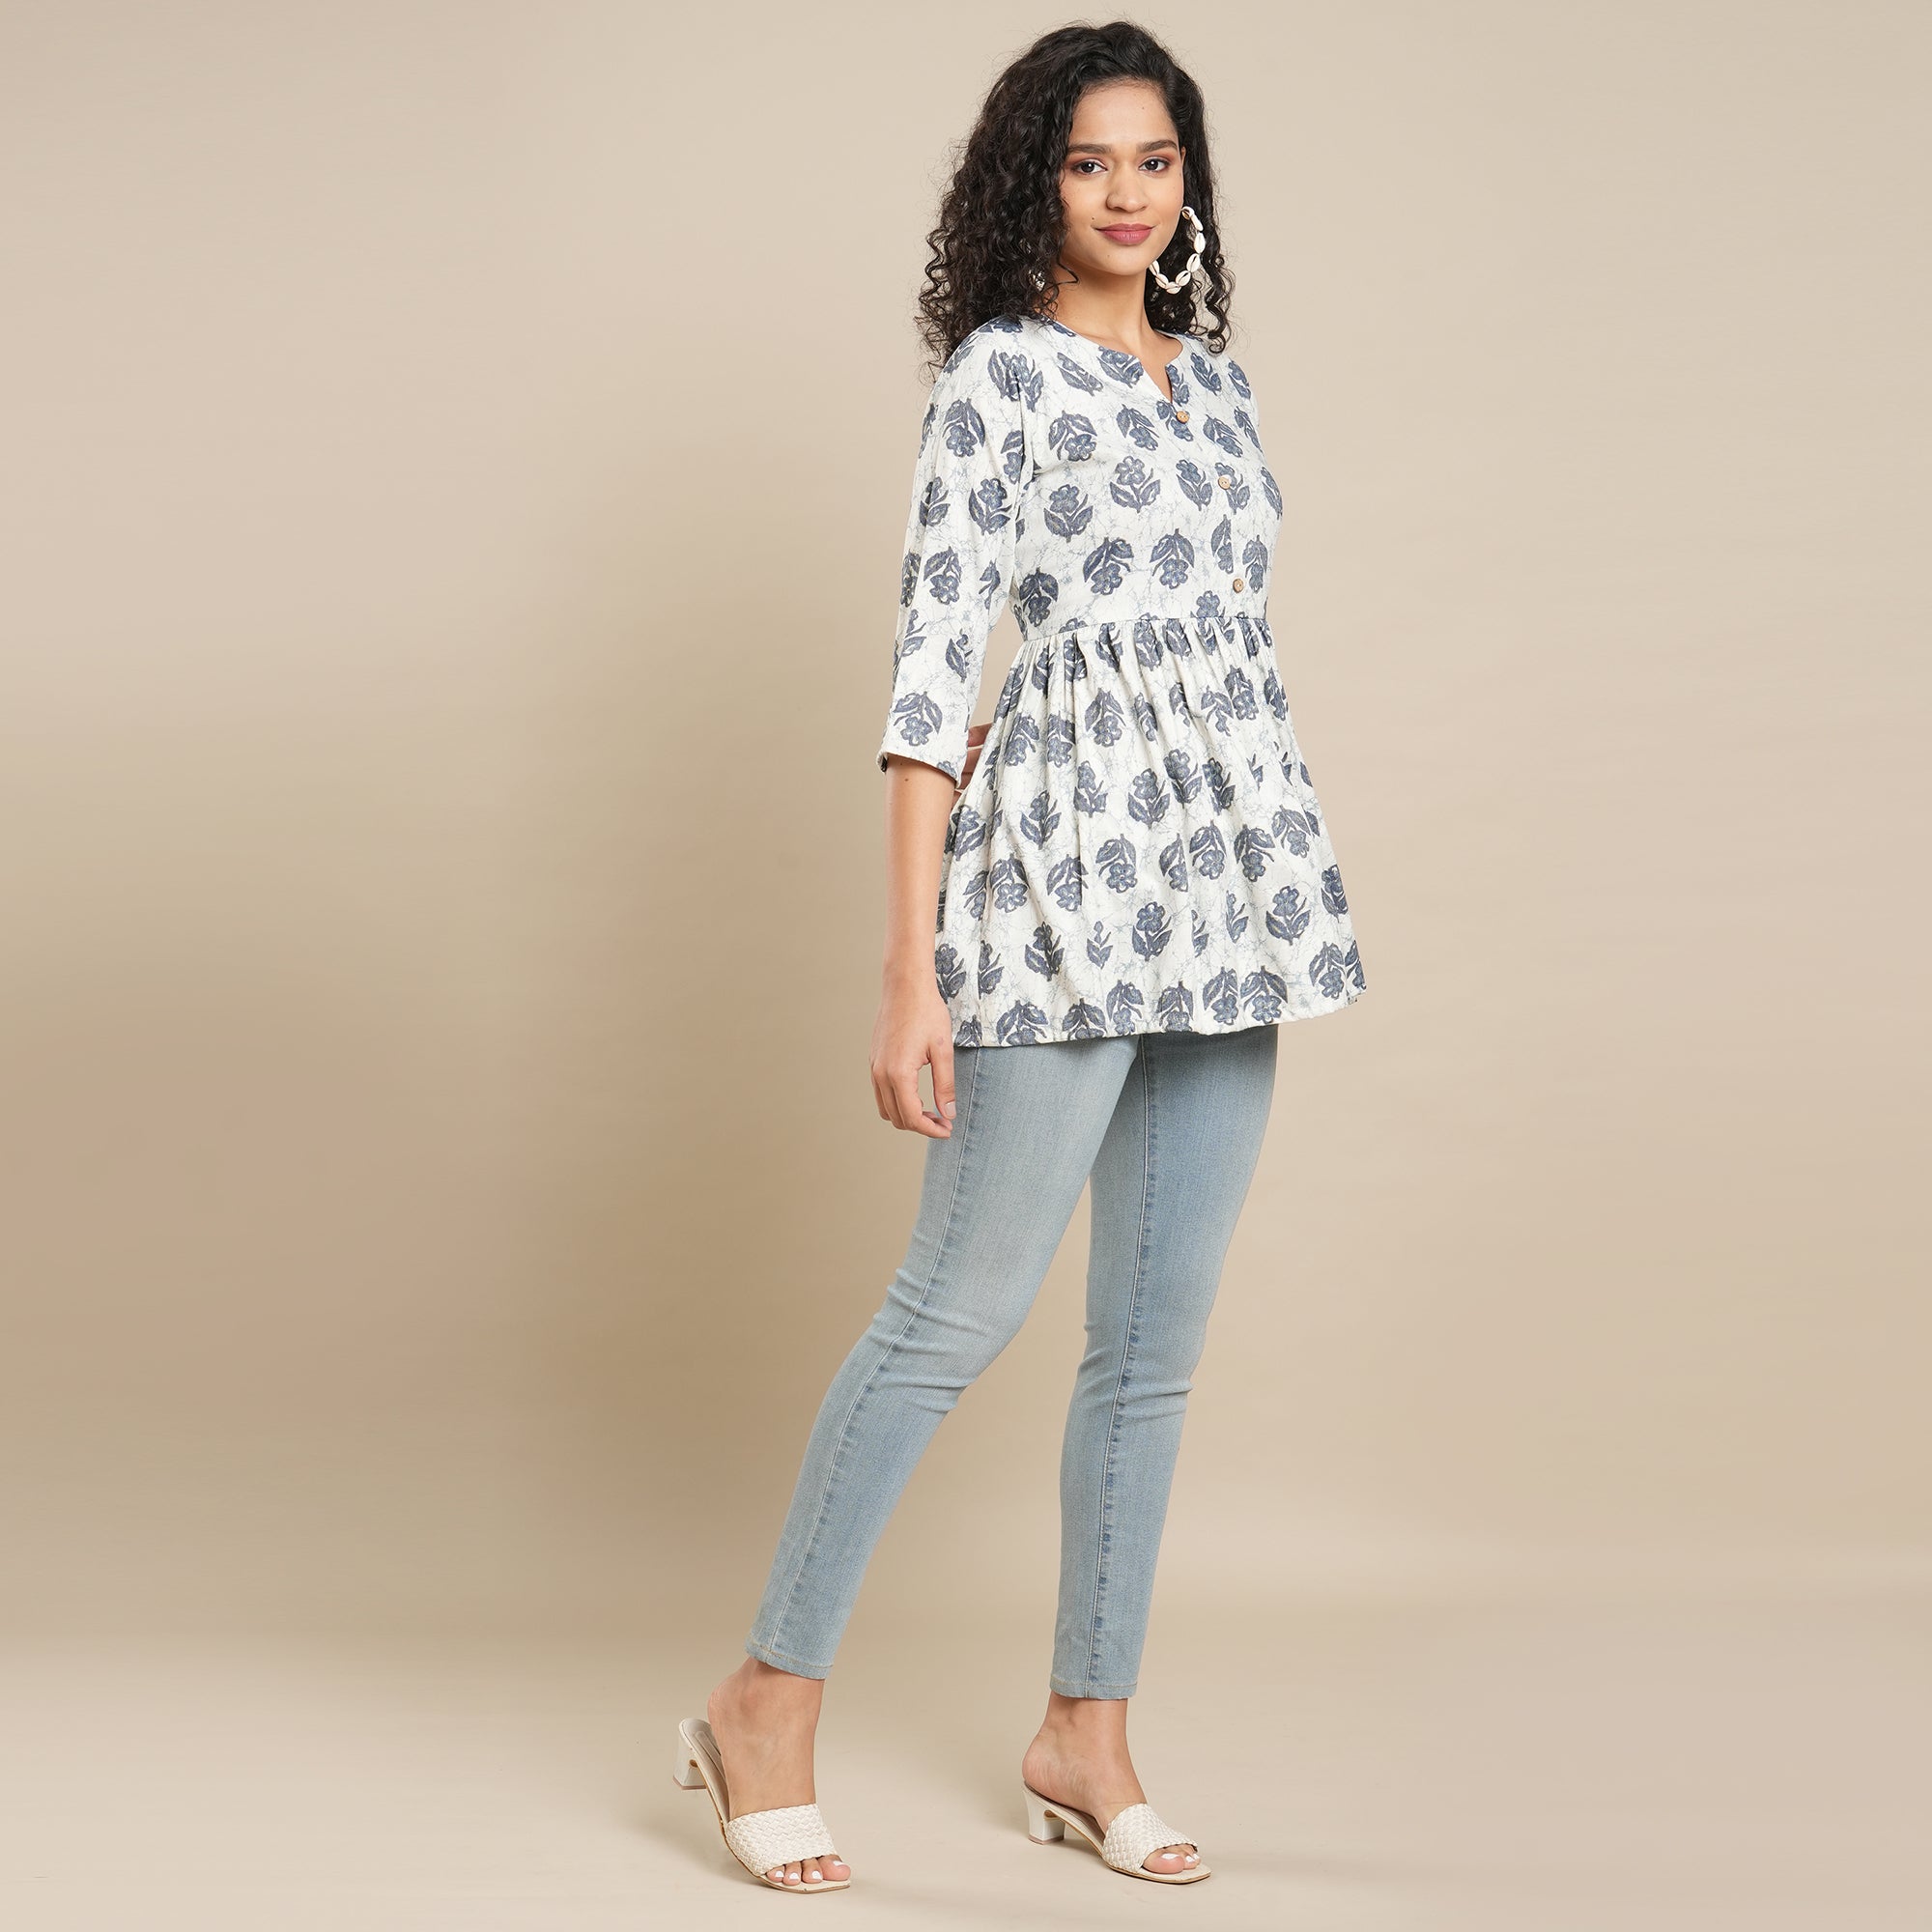 Blue Floral Foil Printed Rayon Top